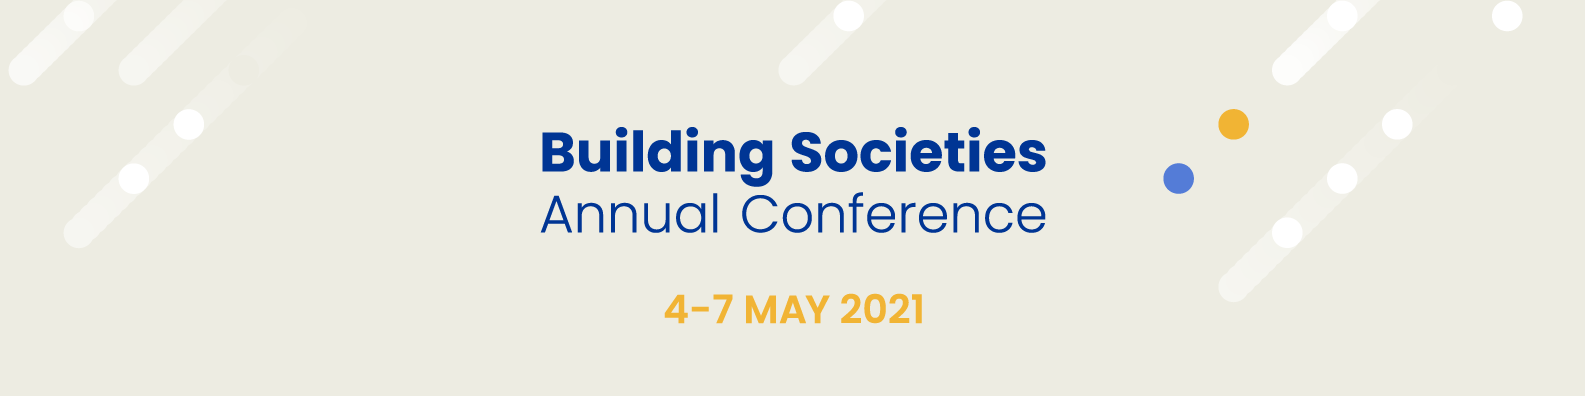 Building Societies Annual Conference 2021